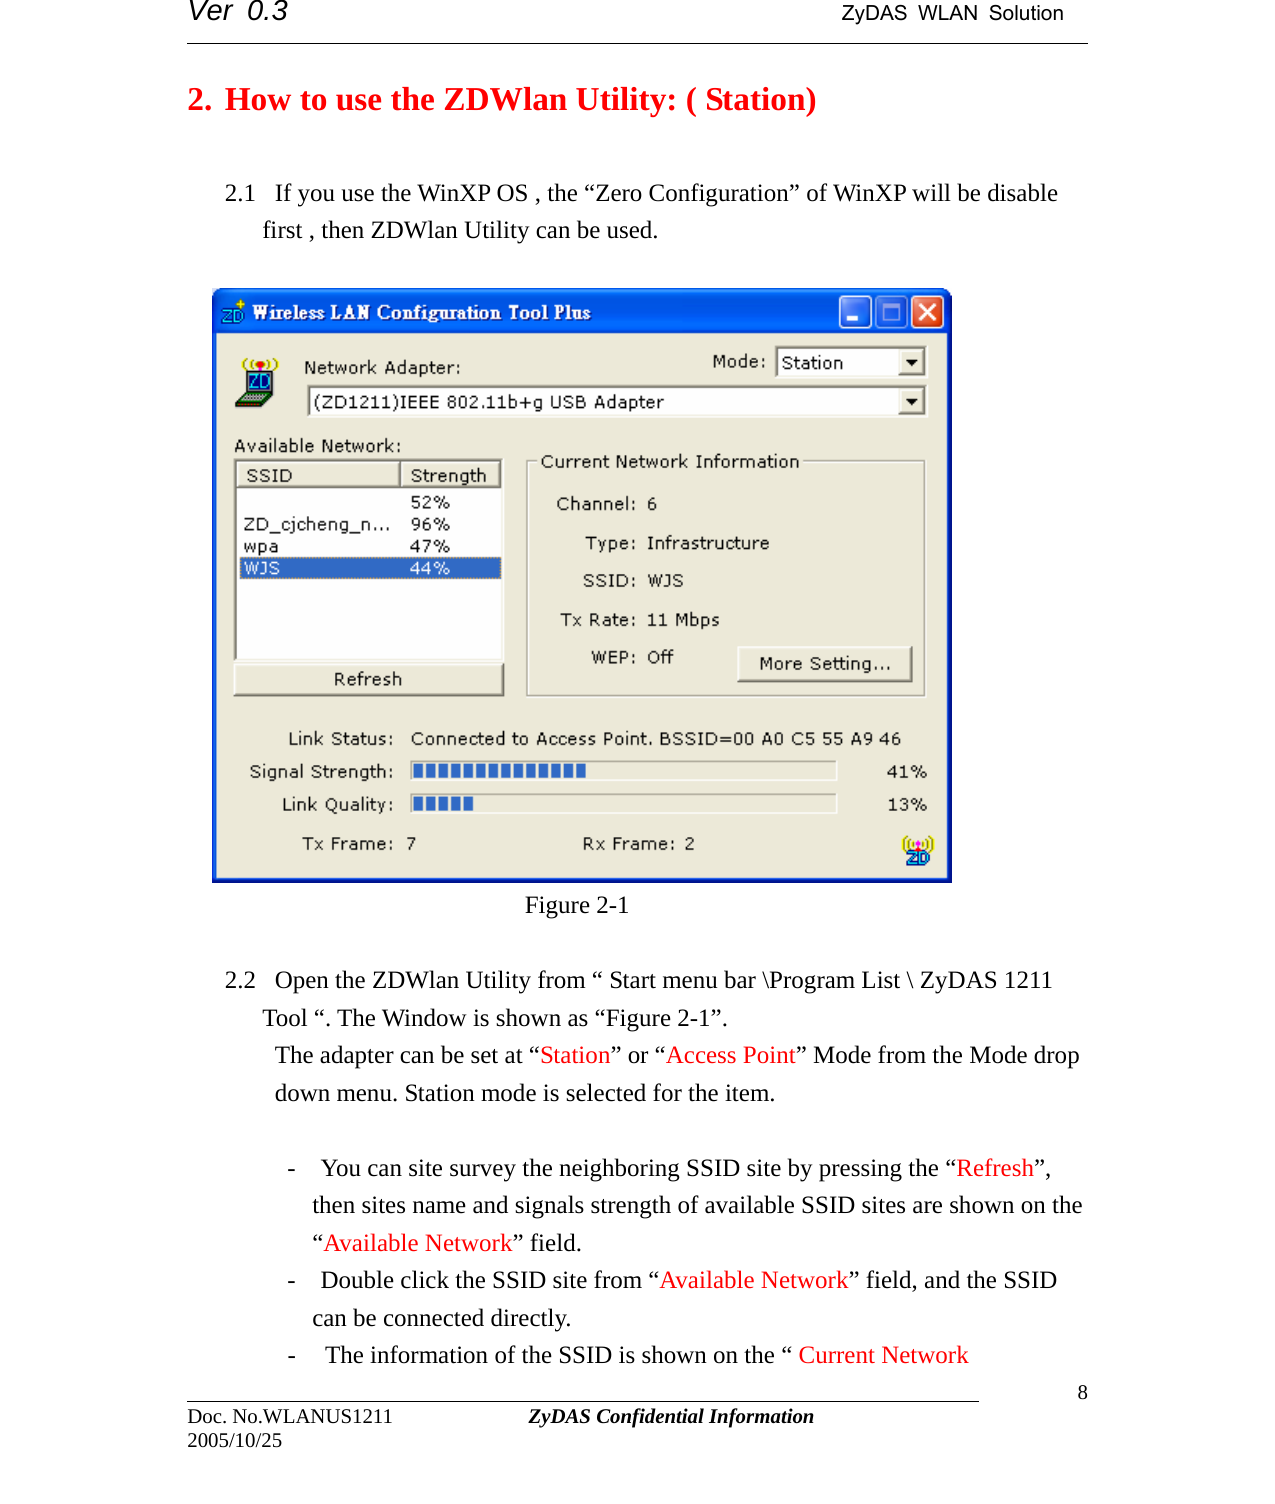 Ver 0.3                                      ZyDAS WLAN Solution                                                                                                                      2. How to use the ZDWlan Utility: ( Station)    2.1   If you use the WinXP OS , the “Zero Configuration” of WinXP will be disable         first , then ZDWlan Utility can be used.                            Figure 2-1  2.2   Open the ZDWlan Utility from “ Start menu bar \Program List \ ZyDAS 1211           Tool “. The Window is shown as “Figure 2-1”. The adapter can be set at “Station” or “Access Point” Mode from the Mode drop down menu. Station mode is selected for the item.      -    You can site survey the neighboring SSID site by pressing the “Refresh”, then sites name and signals strength of available SSID sites are shown on the “Available Network” field.   -    Double click the SSID site from “Available Network” field, and the SSID can be connected directly.                                                                                  Doc. No.WLANUS1211             ZyDAS Confidential Information                   8 2005/10/25 - The information of the SSID is shown on the “ Current Network 